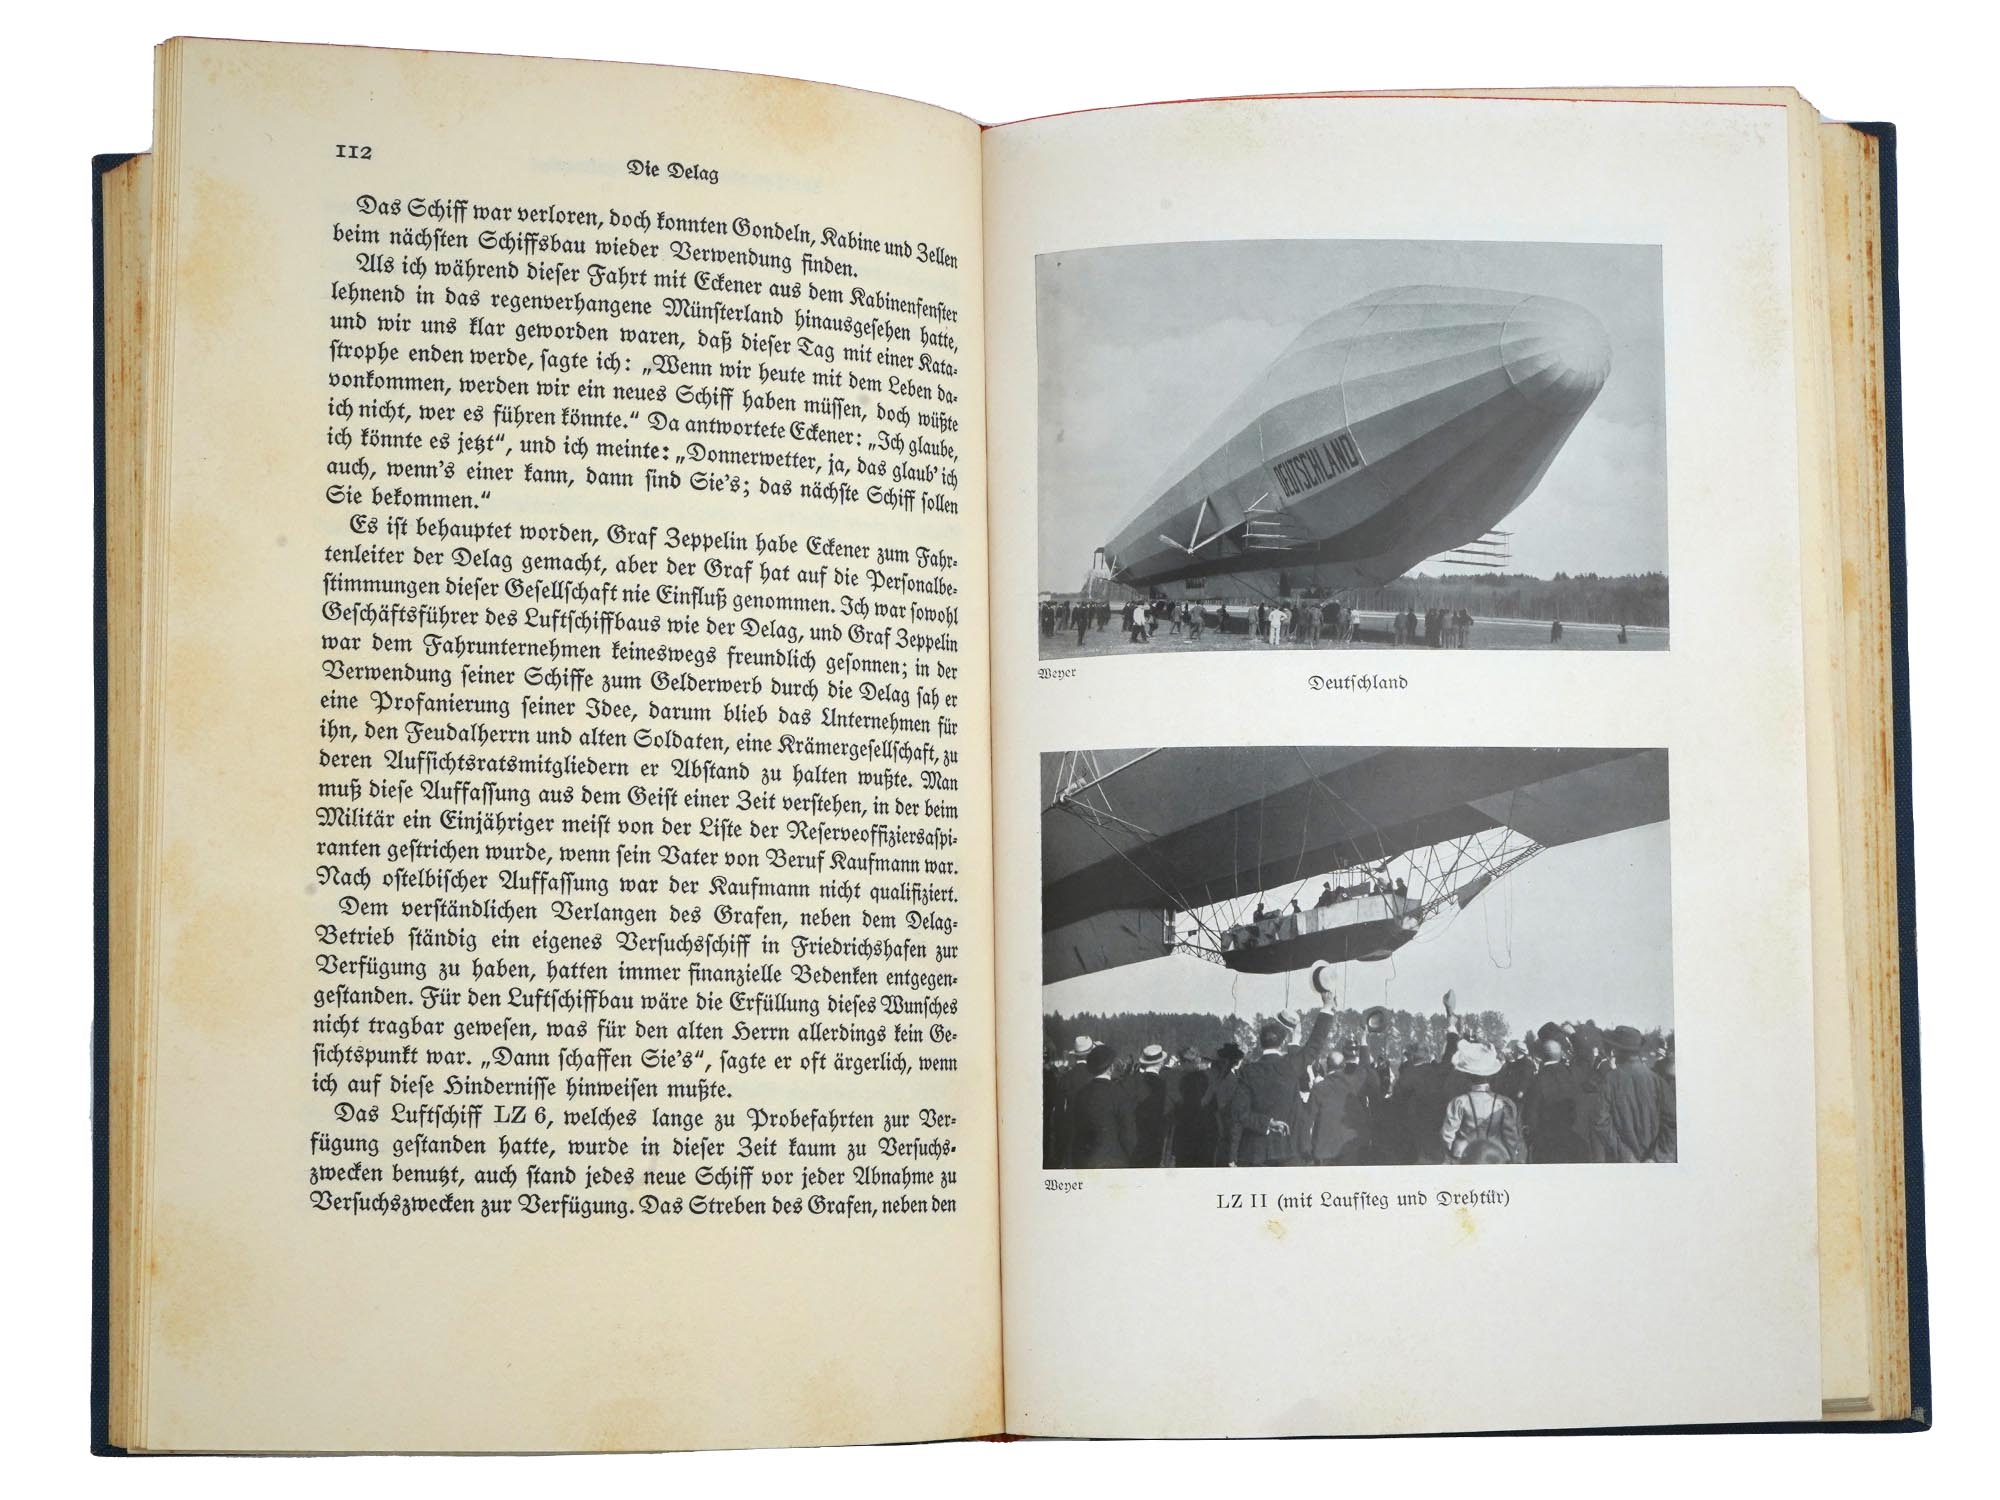 ZEPPELIN BOOK FROM ADOLF HITLERS PERSONAL LIBRARY PIC-7